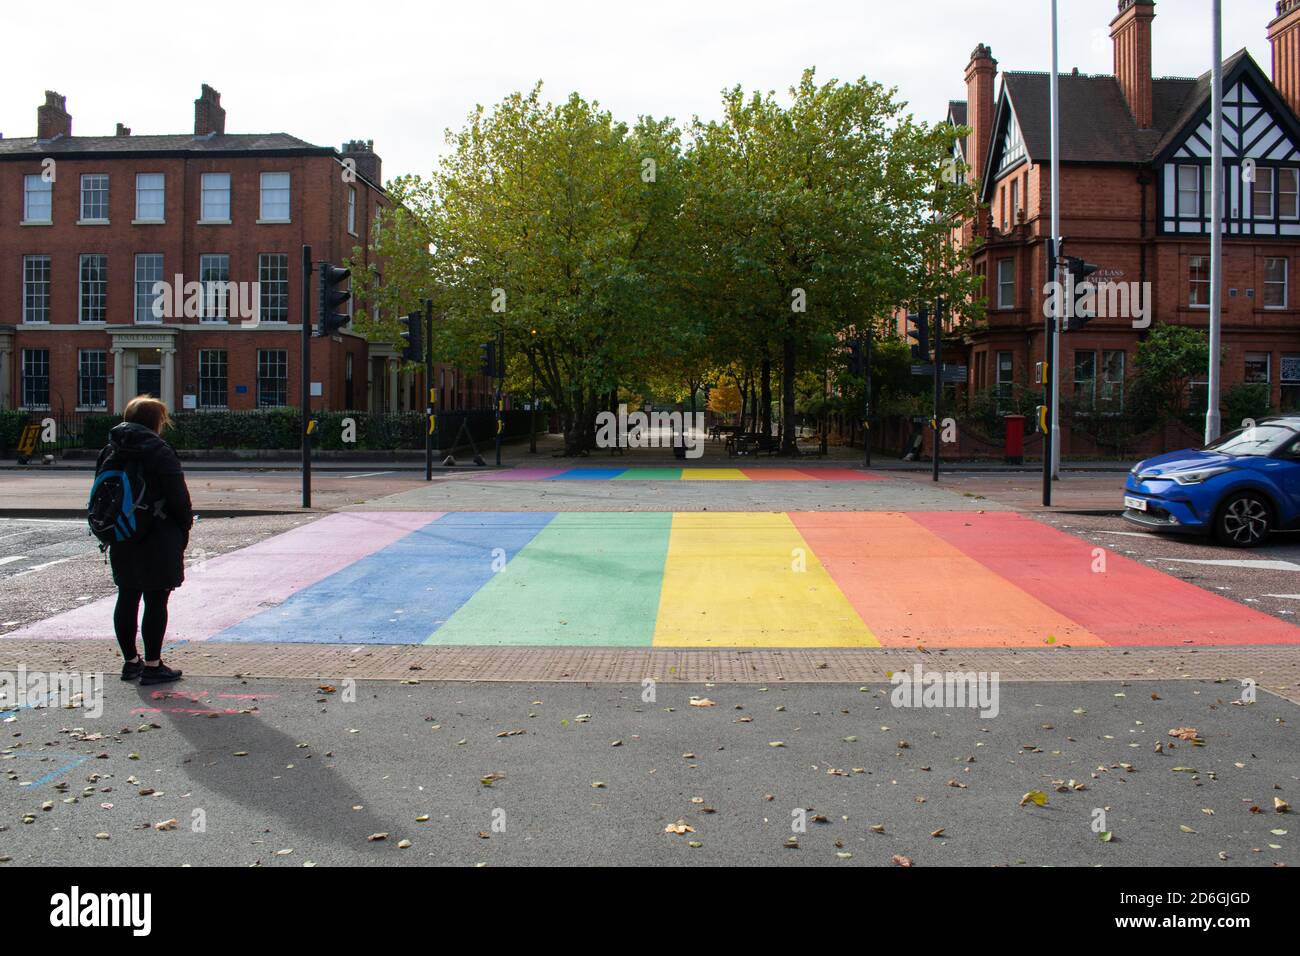 Pride rainbow crossing with woman waiting to cross and blue car on edge of design. Salford crescent speed hump. Salford University, UK Stock Photo